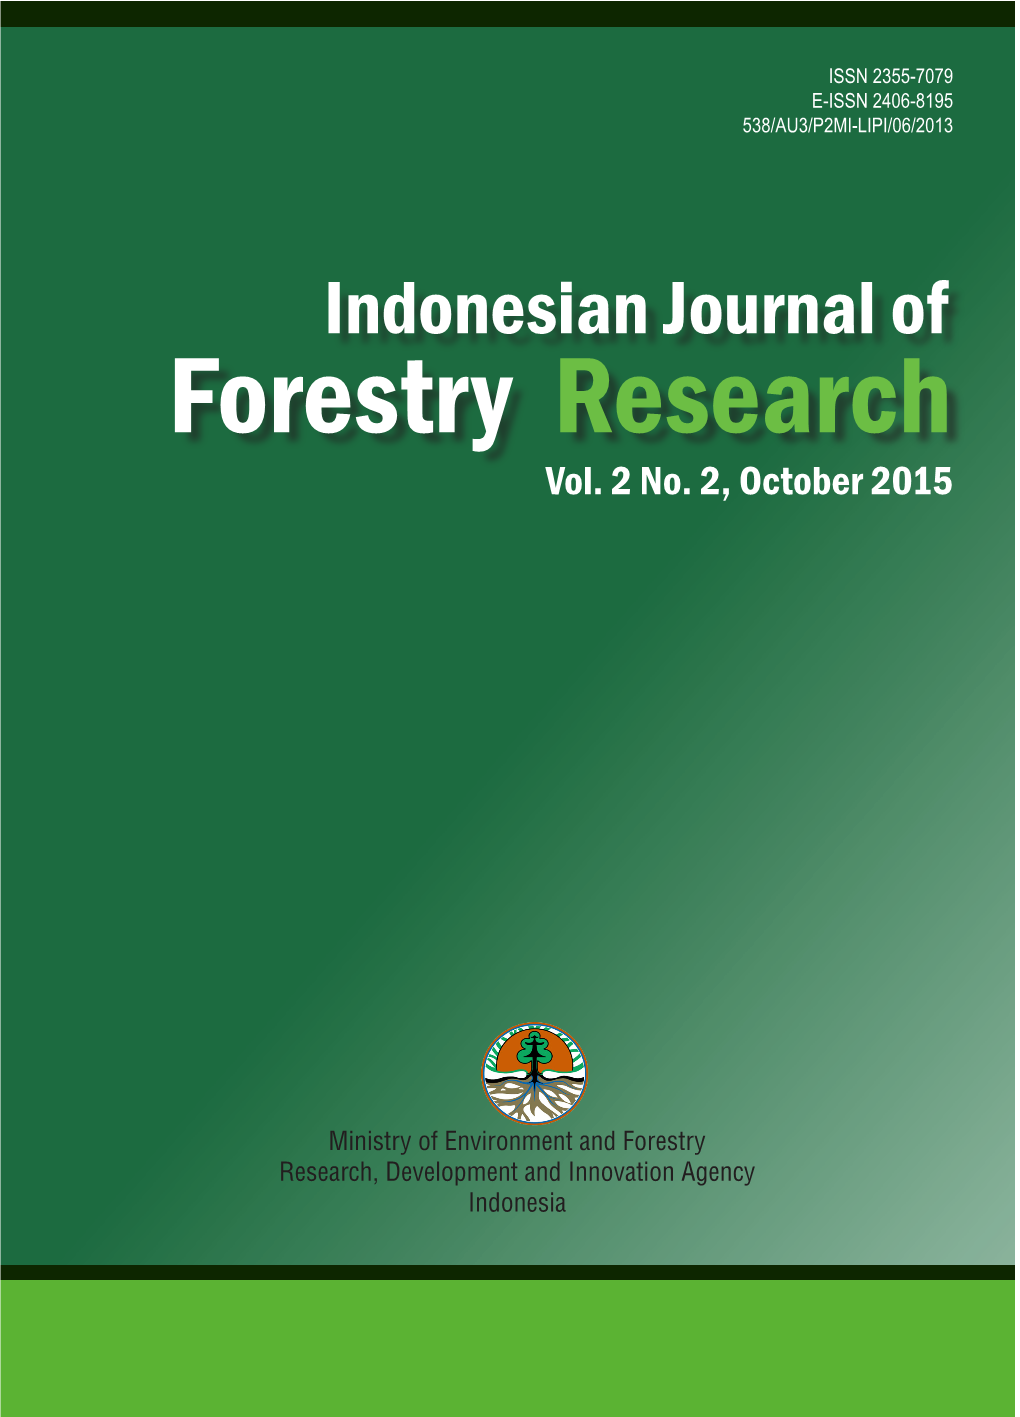 Forestry Research Vol